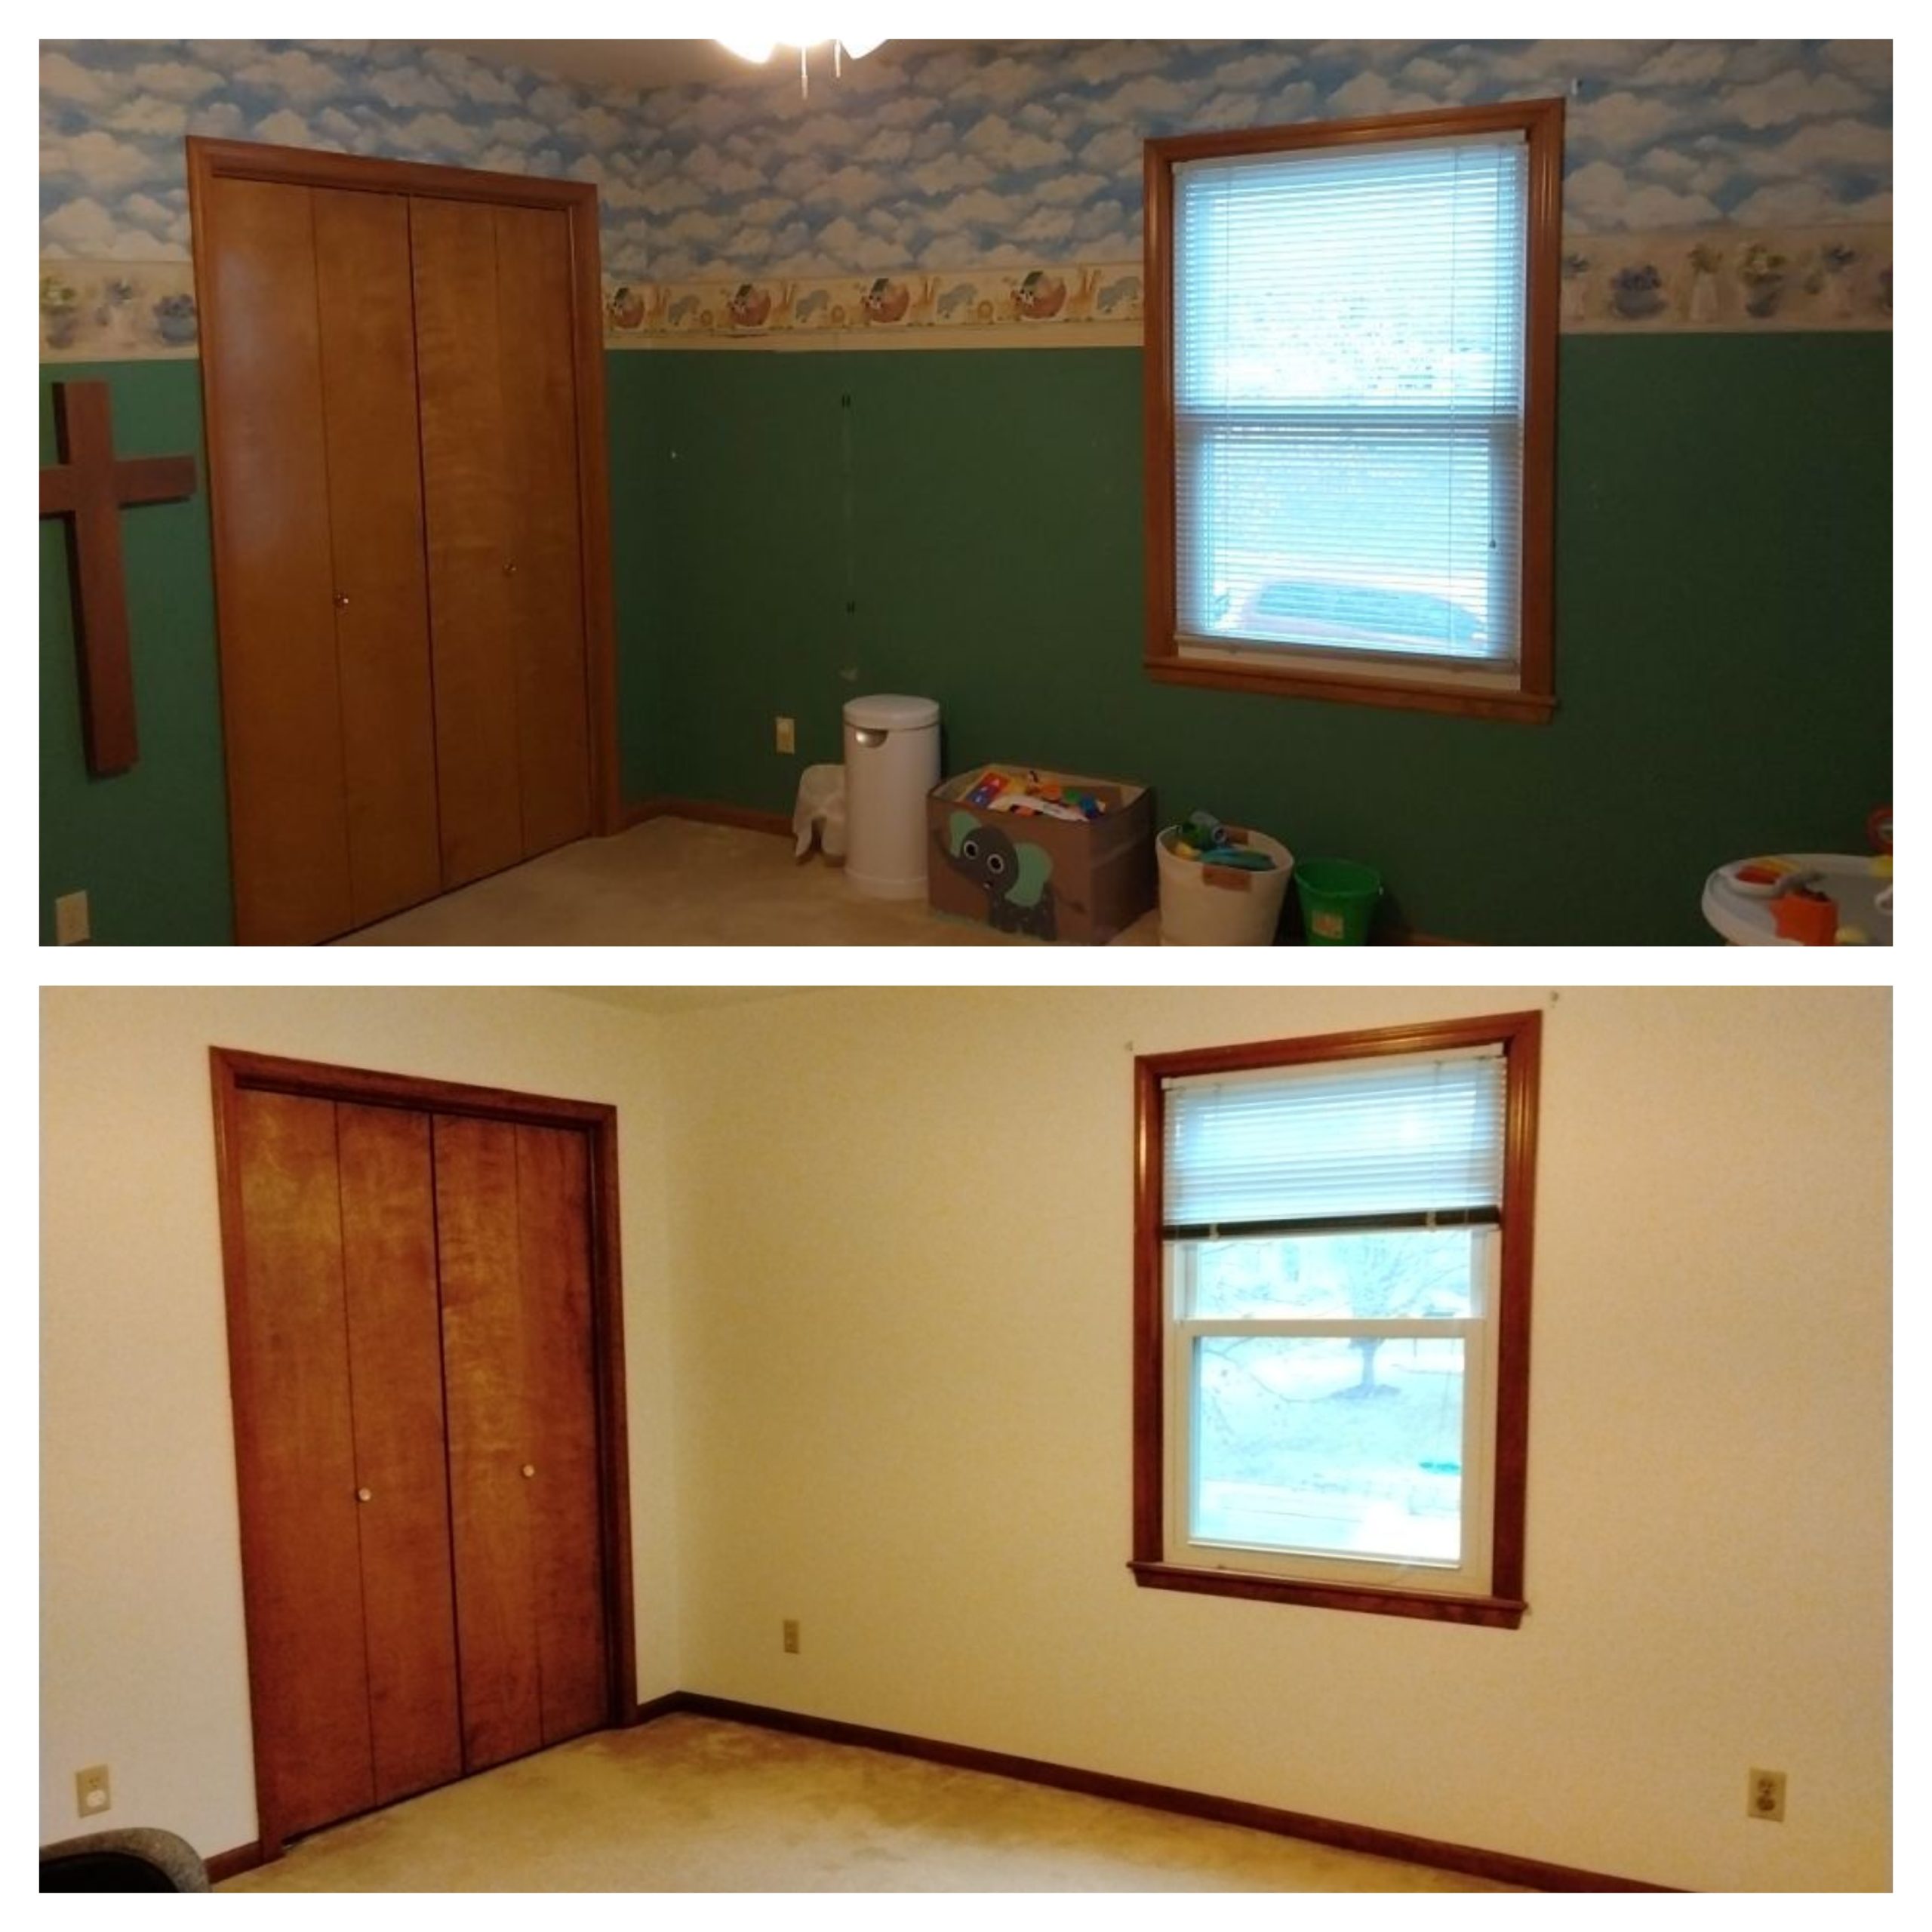 Before And After Comparison of an Wallpaper Services in Topeka, KS